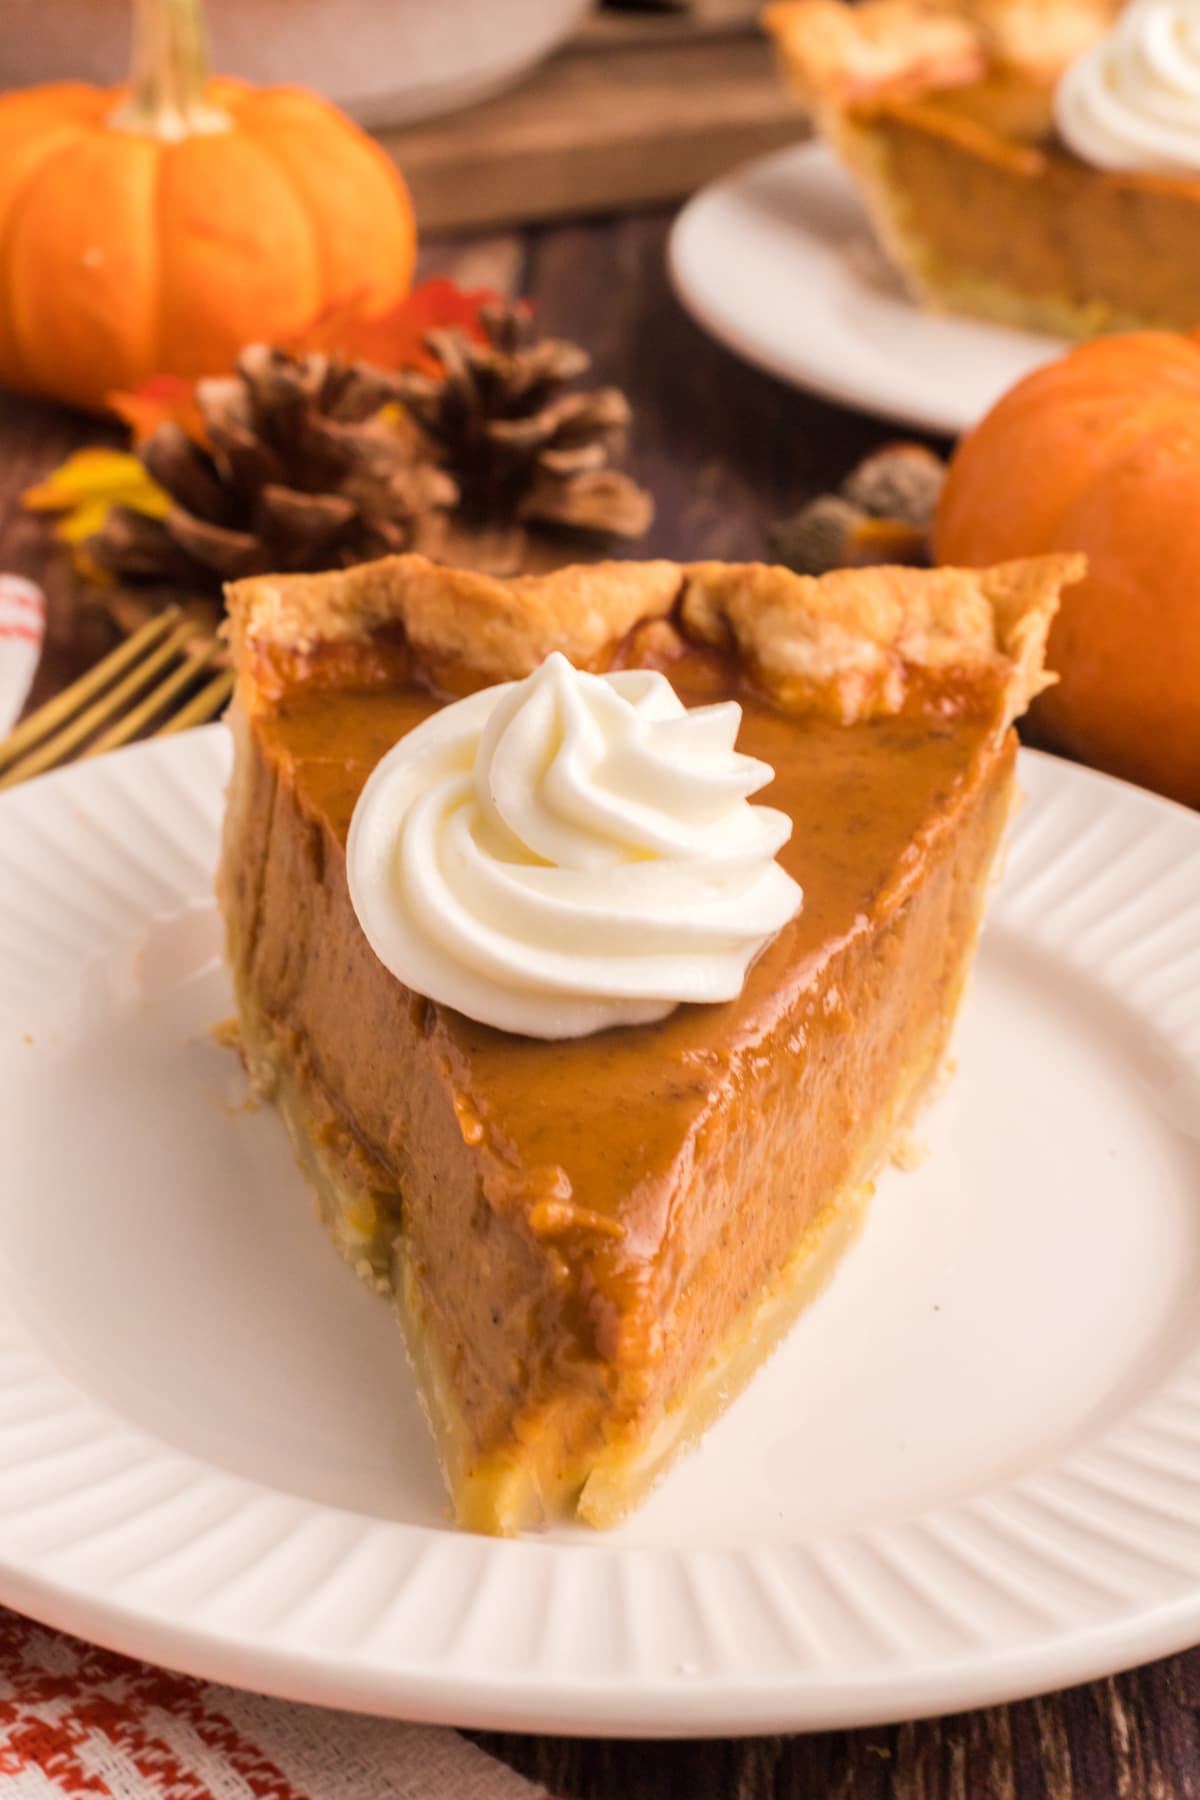 A slice of pumpkin pie with a dollop of whipped cream on a white plate.